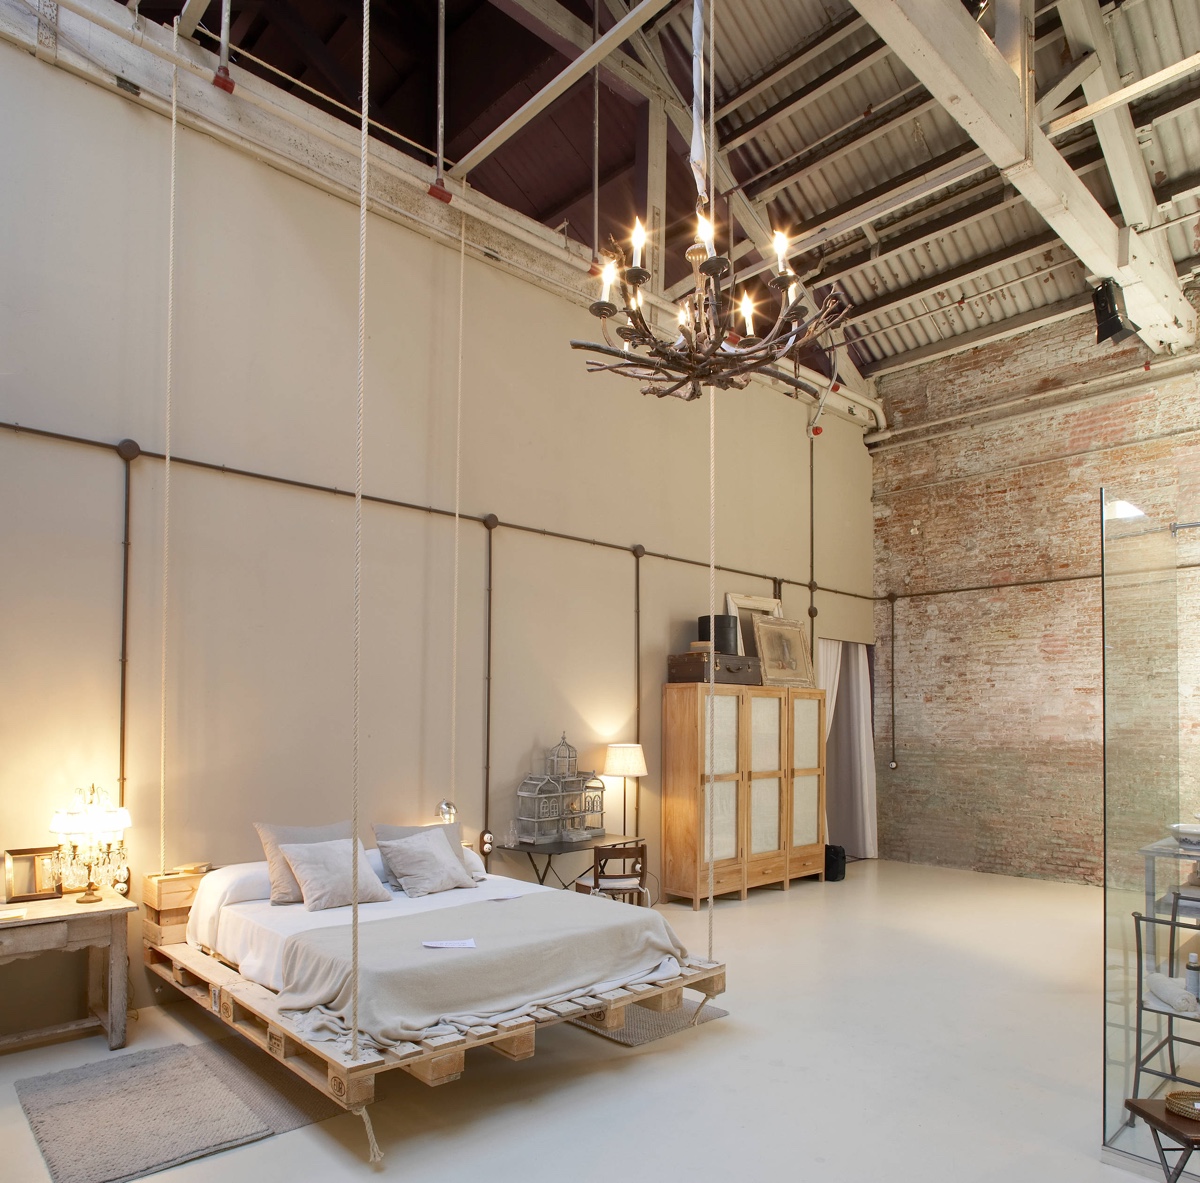 barn-style-with-chandelier-exposed-brick-bedroom 